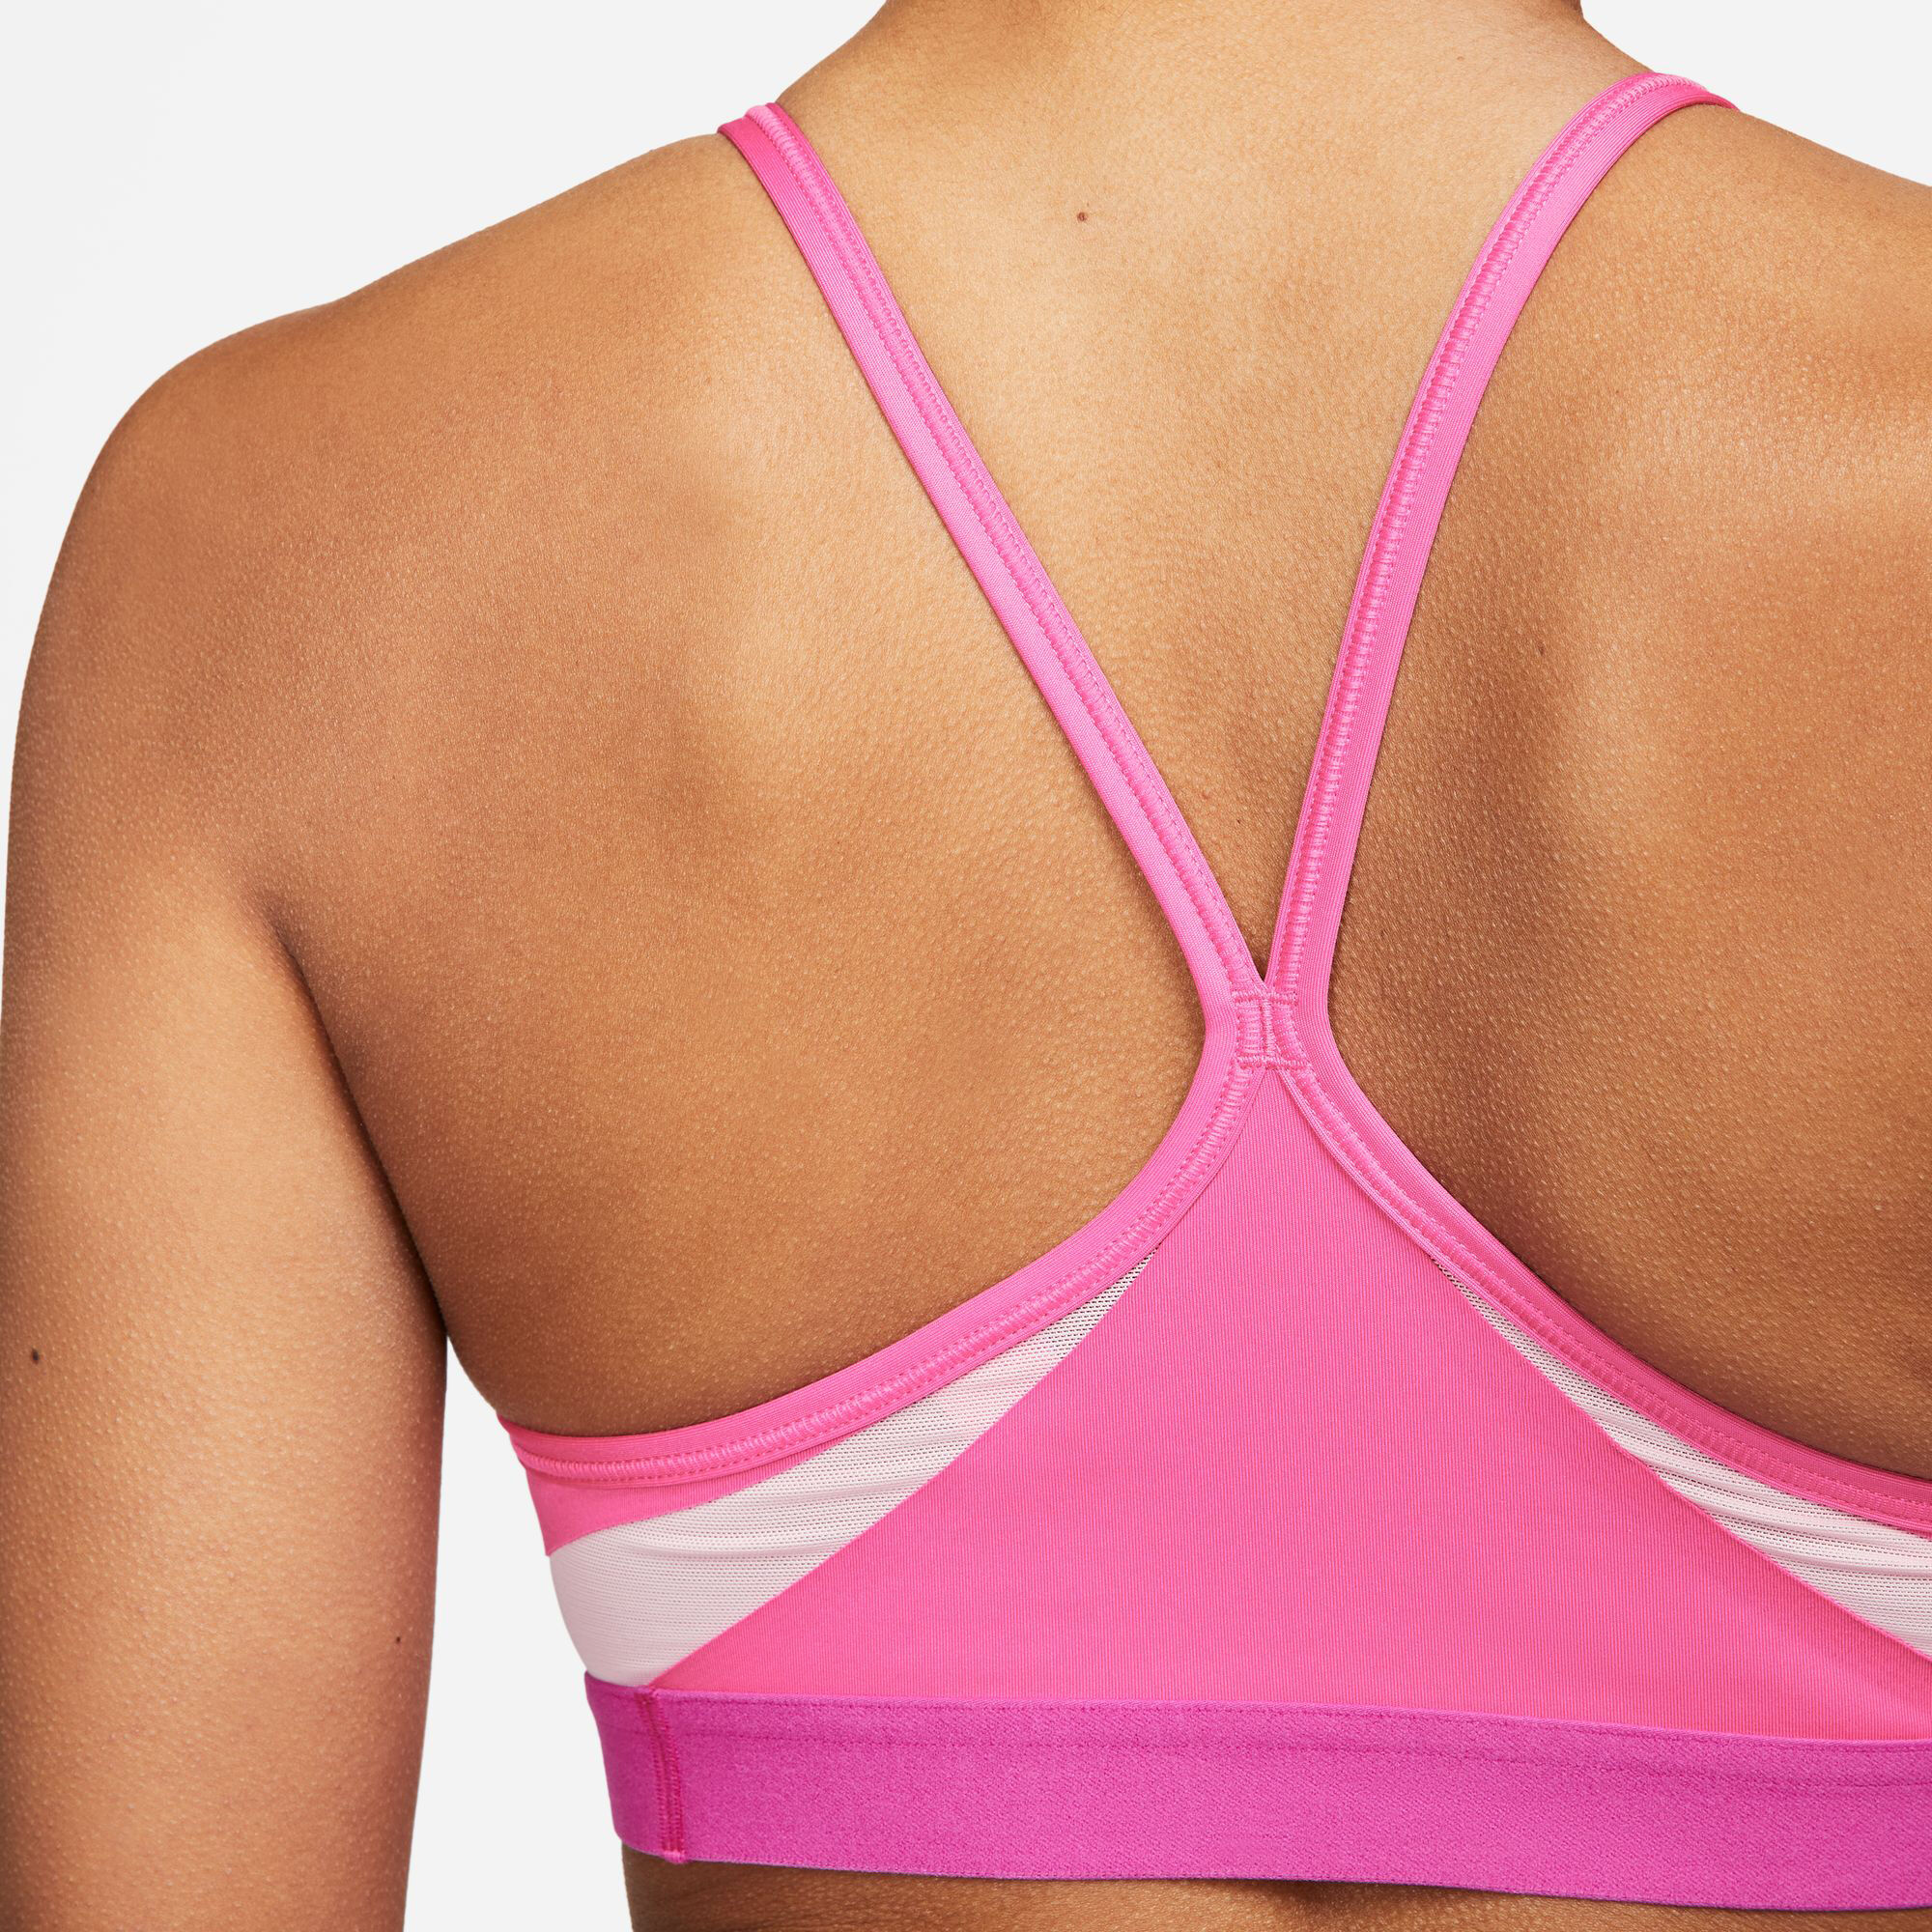 Nike Indy Women's Light-Support Padded V-Neck Sports Bra Pinksicle Berry XL  NWT